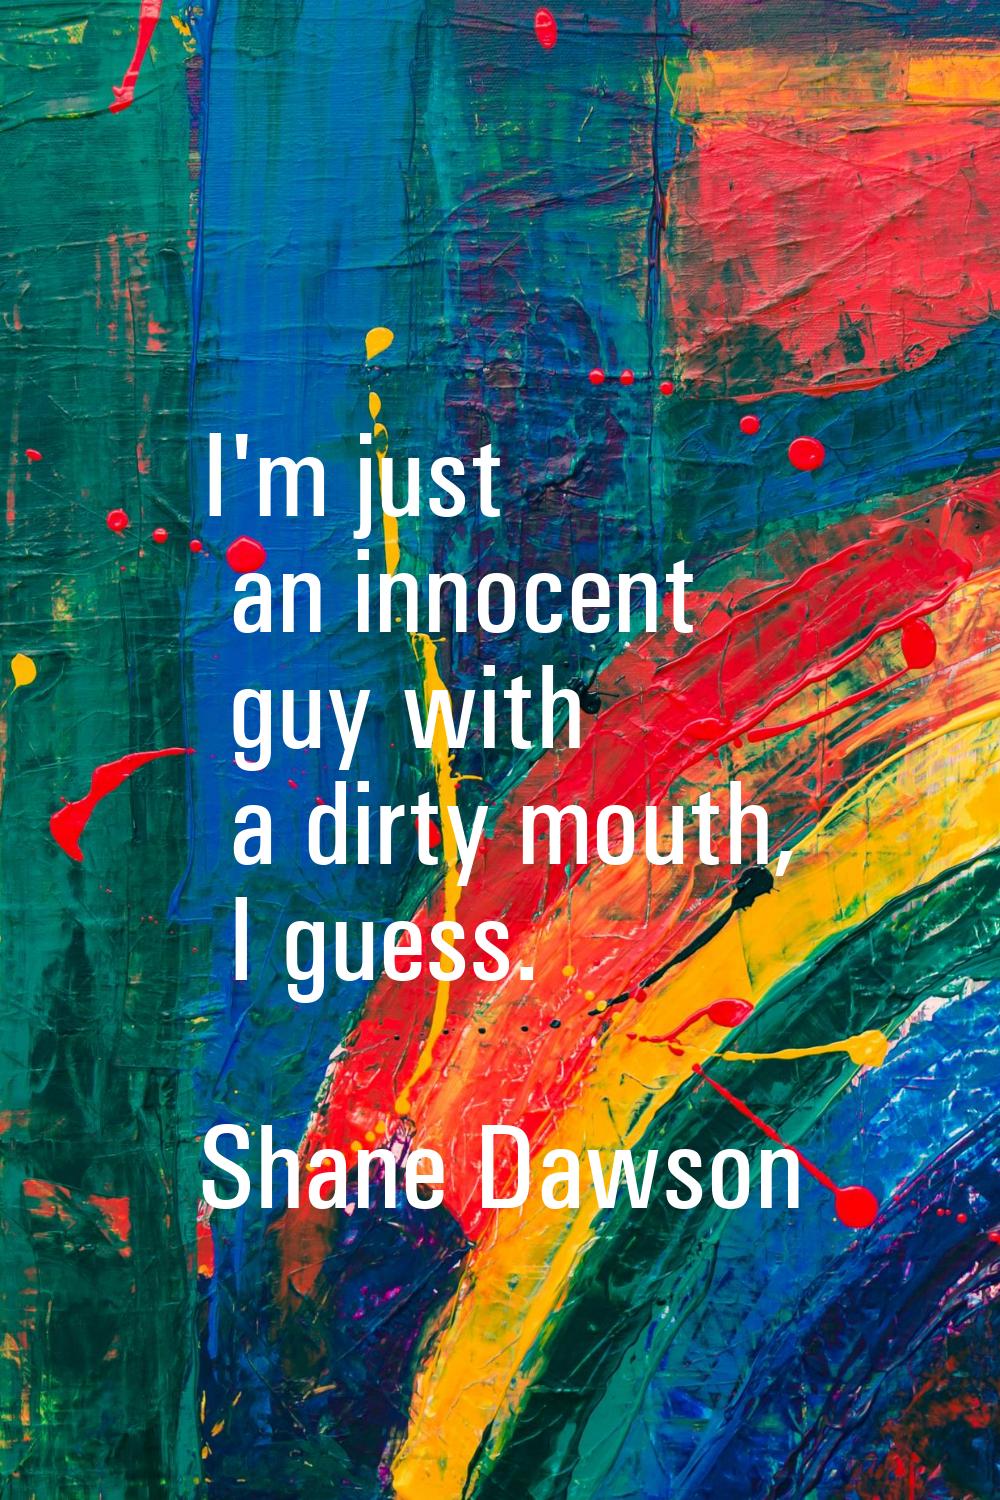 I'm just an innocent guy with a dirty mouth, I guess.